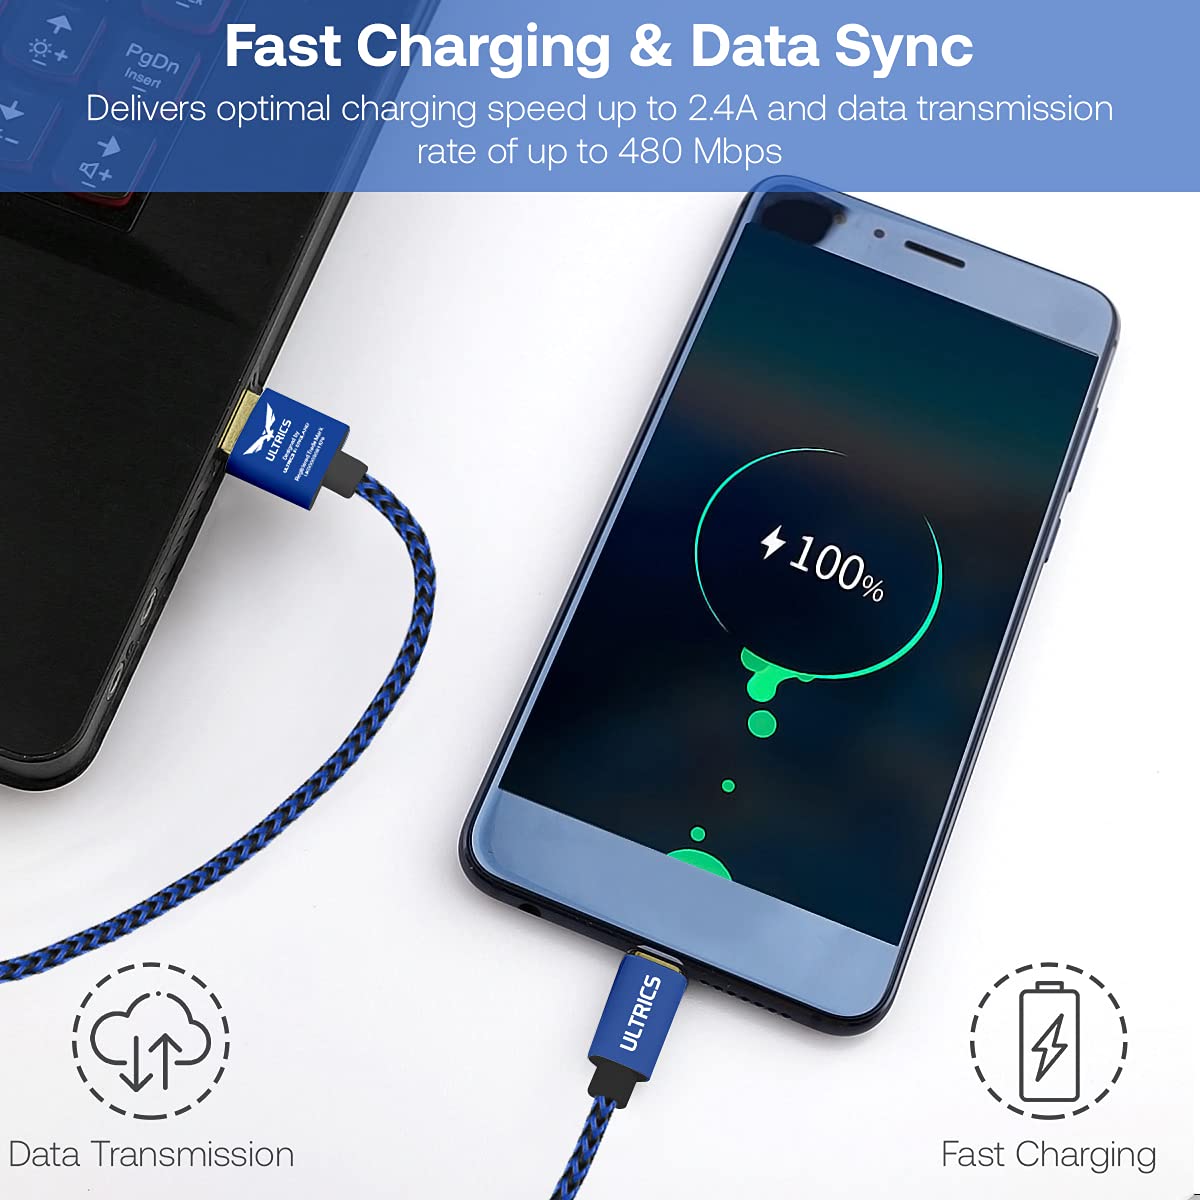 ULTRICS Micro USB Cable 1M, (2 Pack) Nylon Braided Durable Android Charger Lead, Fast Charging and Data Sync Cord Compatible with Samsung Galaxy S7/ S6 Edge/ S5 J7 LG Nexus Nokia Xbox PS4 - Blue